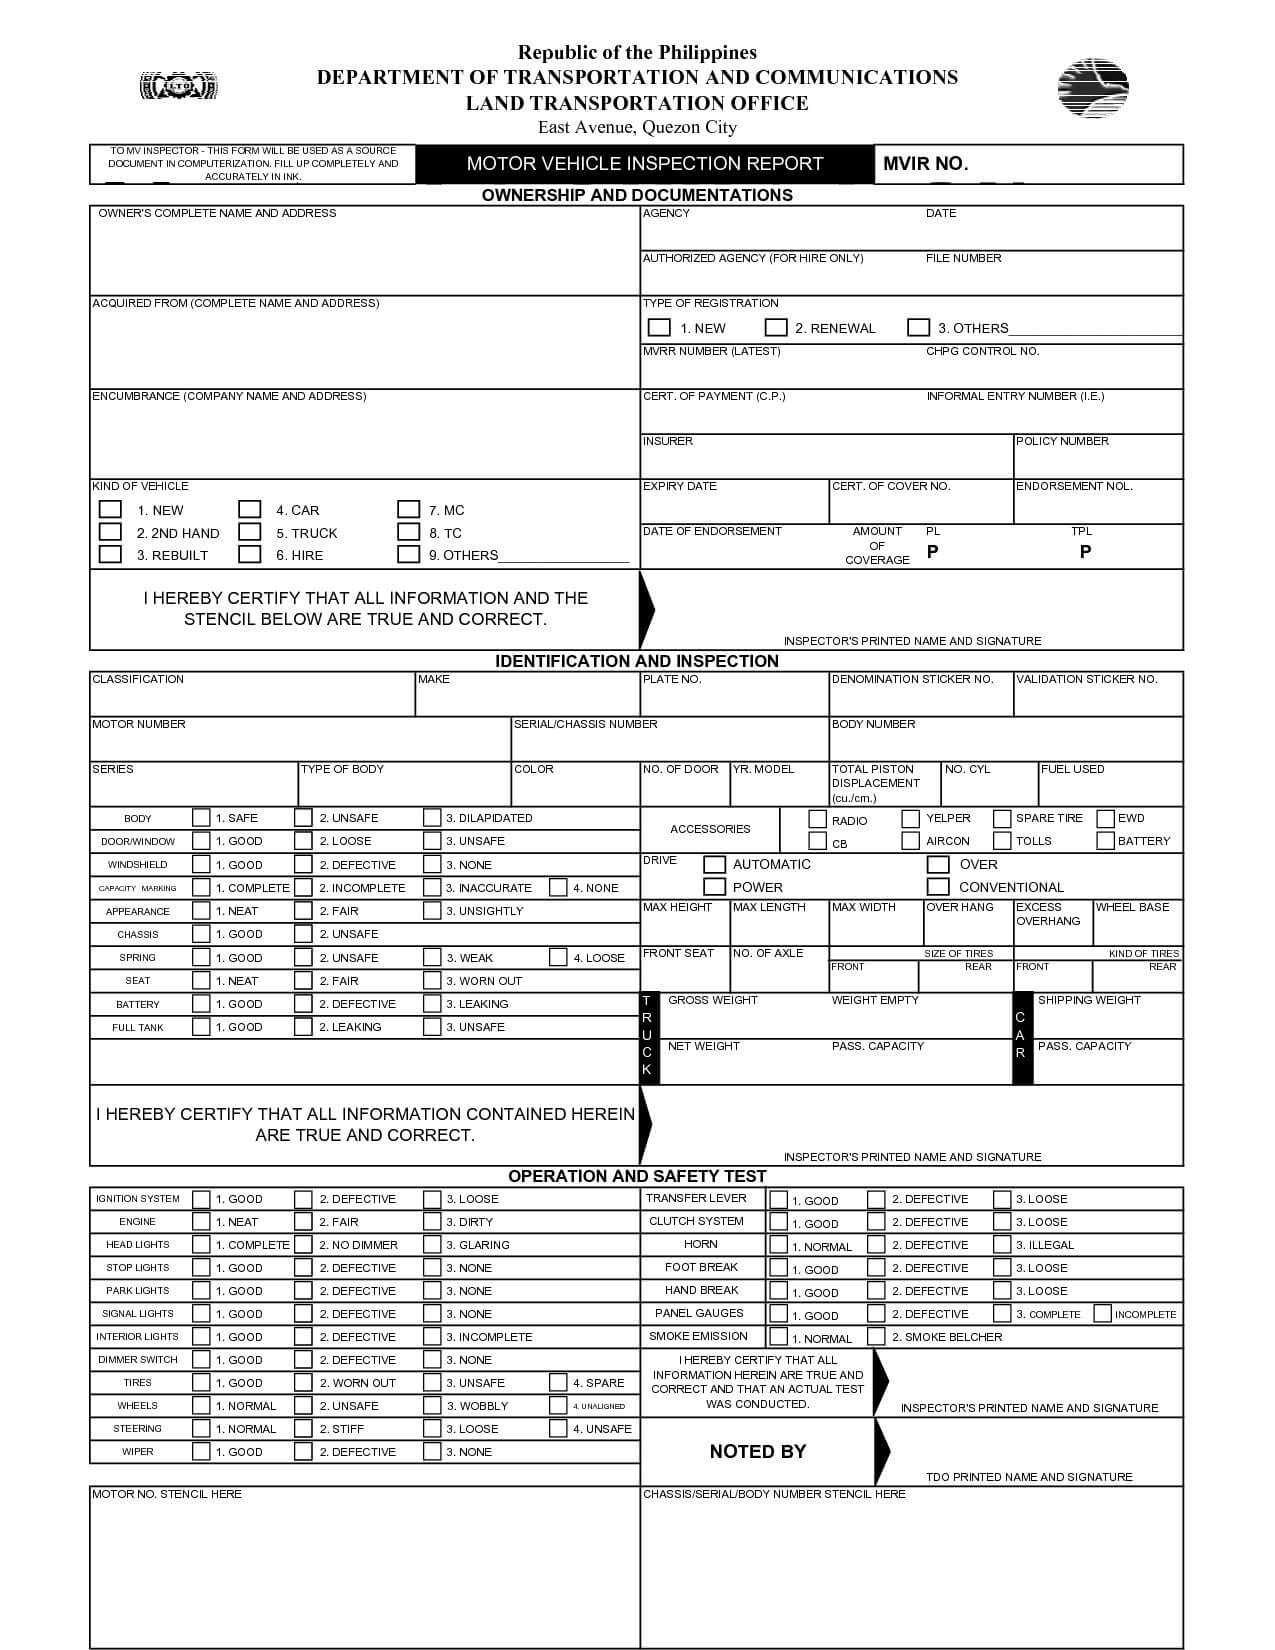 Annual Vehicle Inspection Report Template Free Form Driver's Throughout Vehicle Inspection Report Template